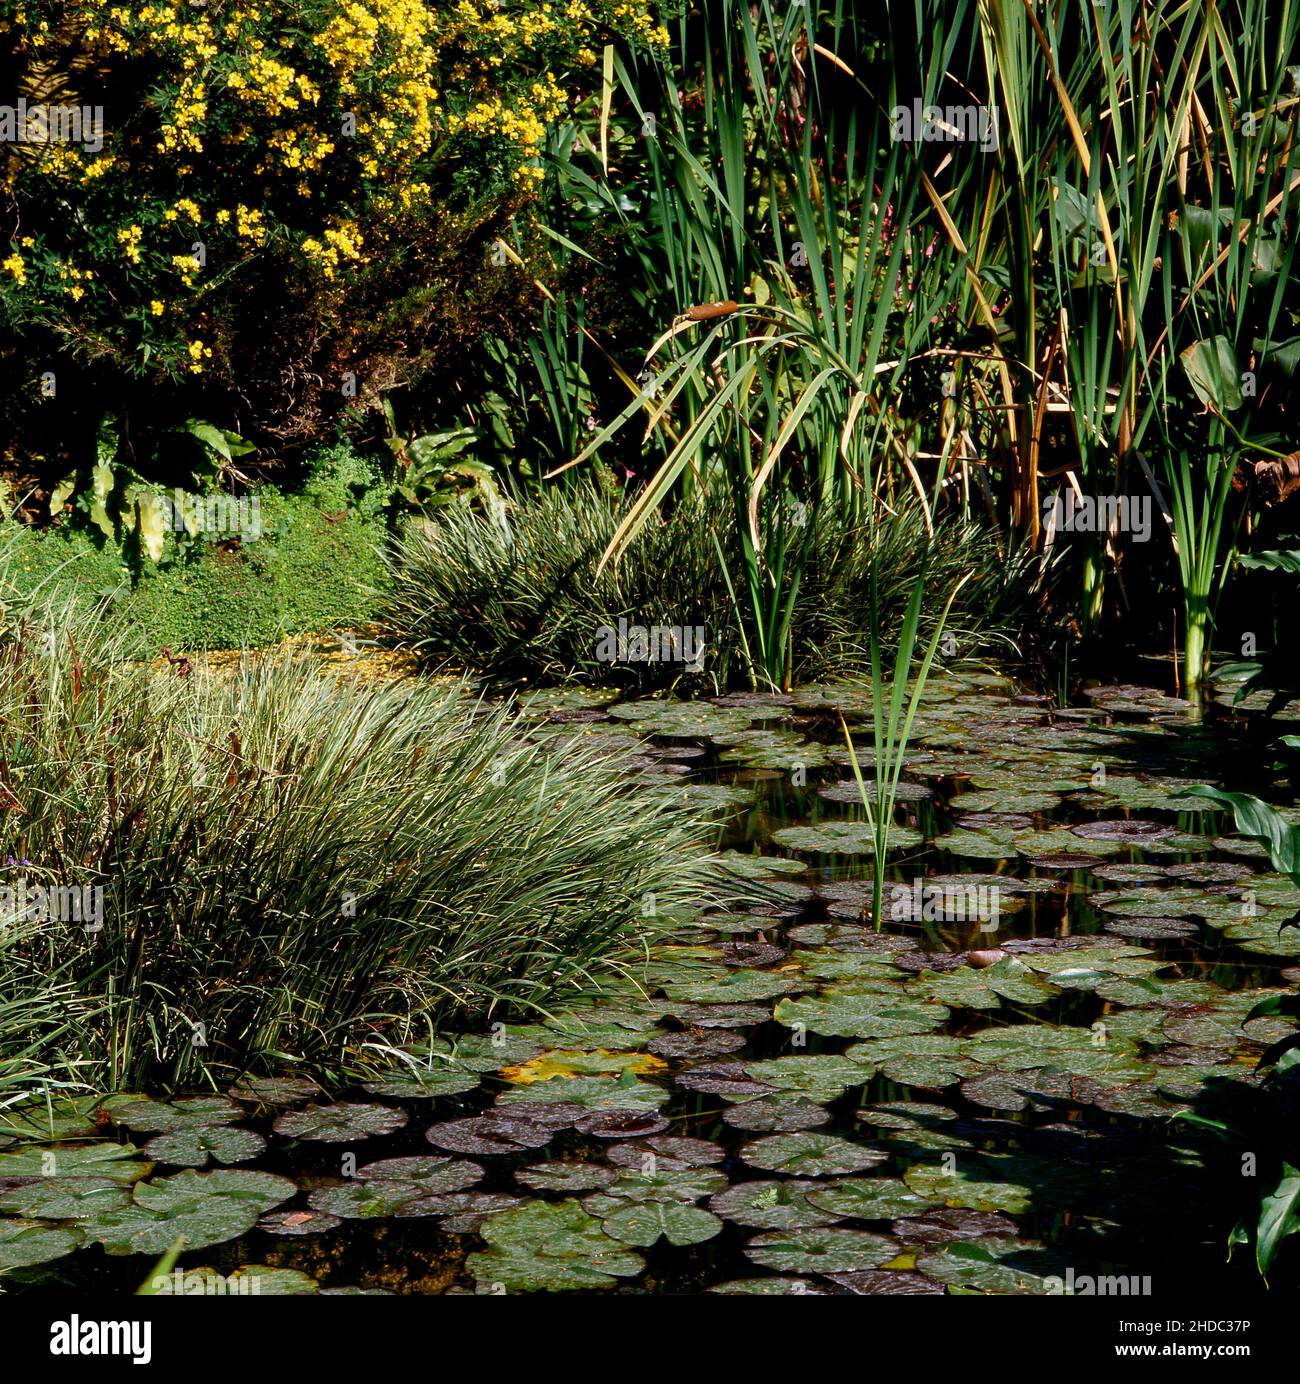 Garden pond with water lilies and cattails bulrush (Typha latifolia) Grasses and reeds - Stock Photo